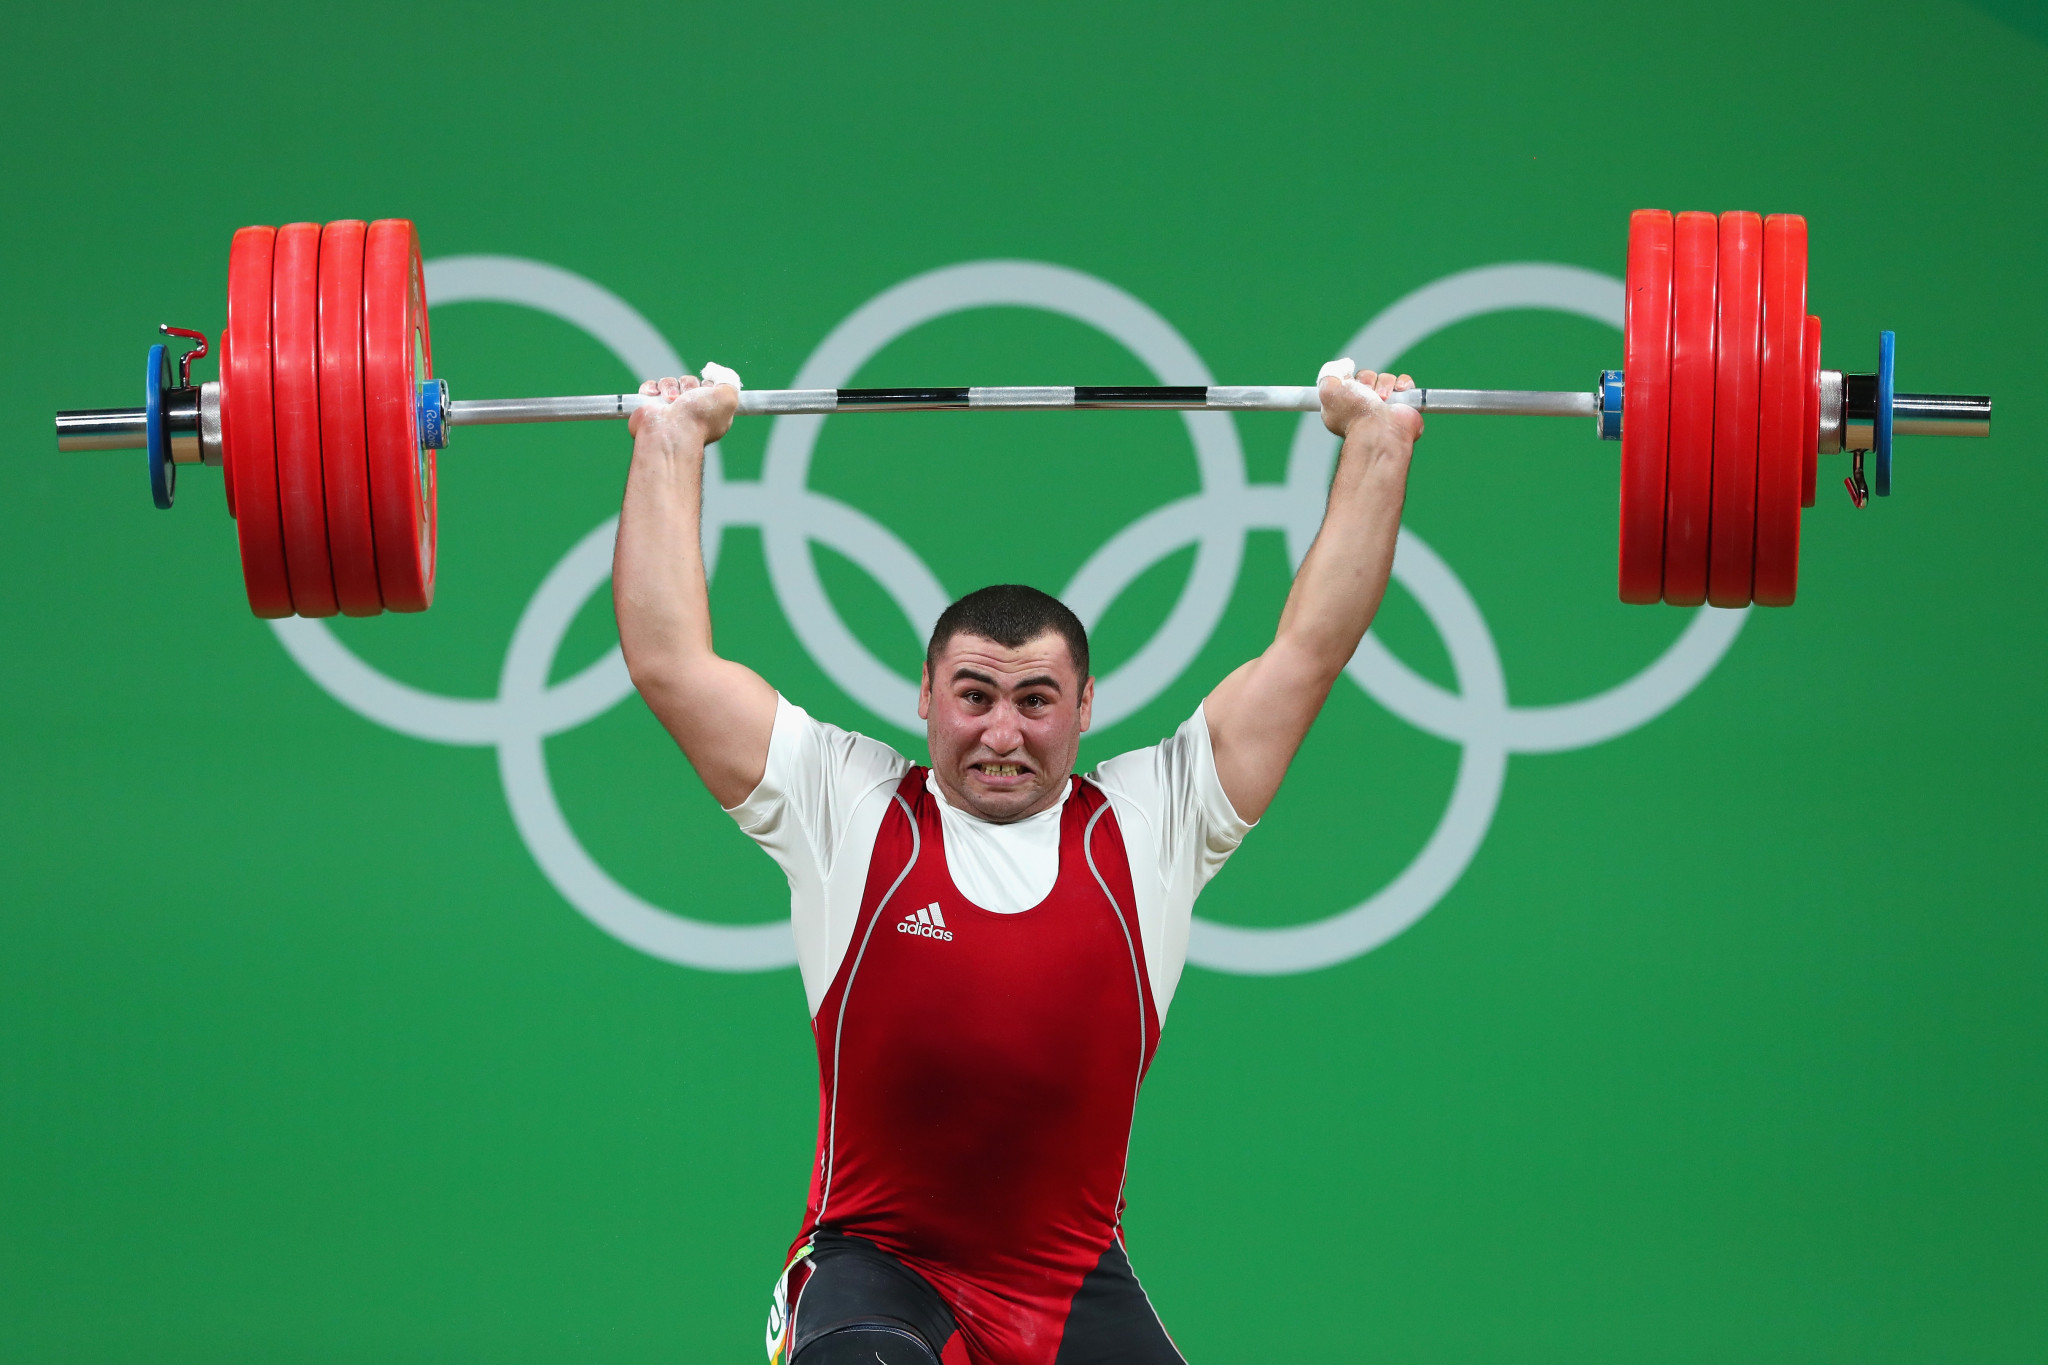 Weightlifting bans will have drastic effect but it had to be done says European President Urso